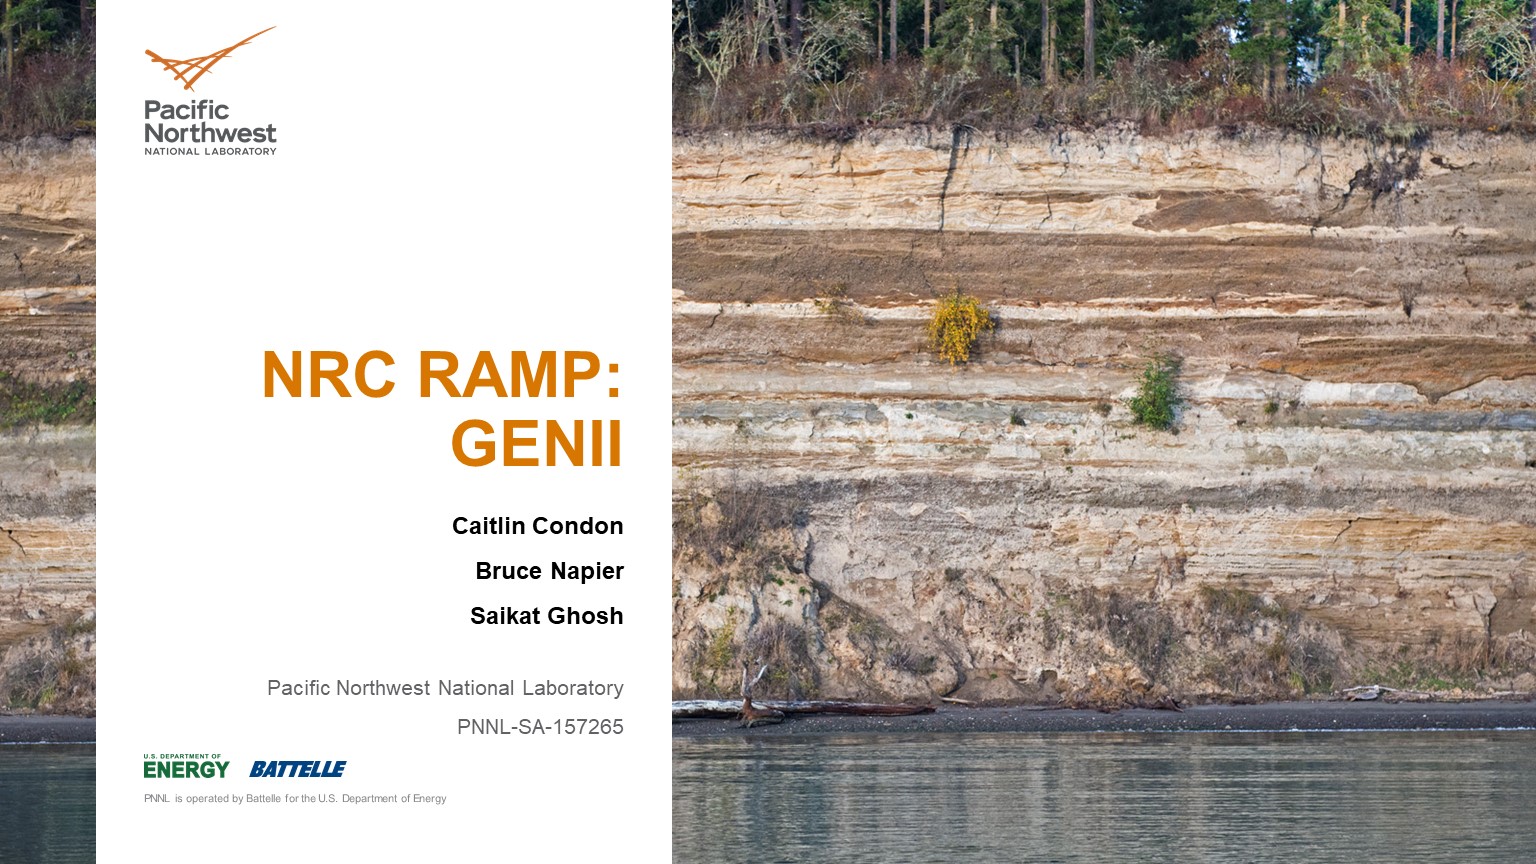 NRC RAMP: GENII - by Caitlin Condon, Bruce Napier, Saikat Ghosh - from Pacific Northwest National Laboratory  (PNNL-SA-157265). PNNL is operated by Battelle for the U.S. Department of Energy. 